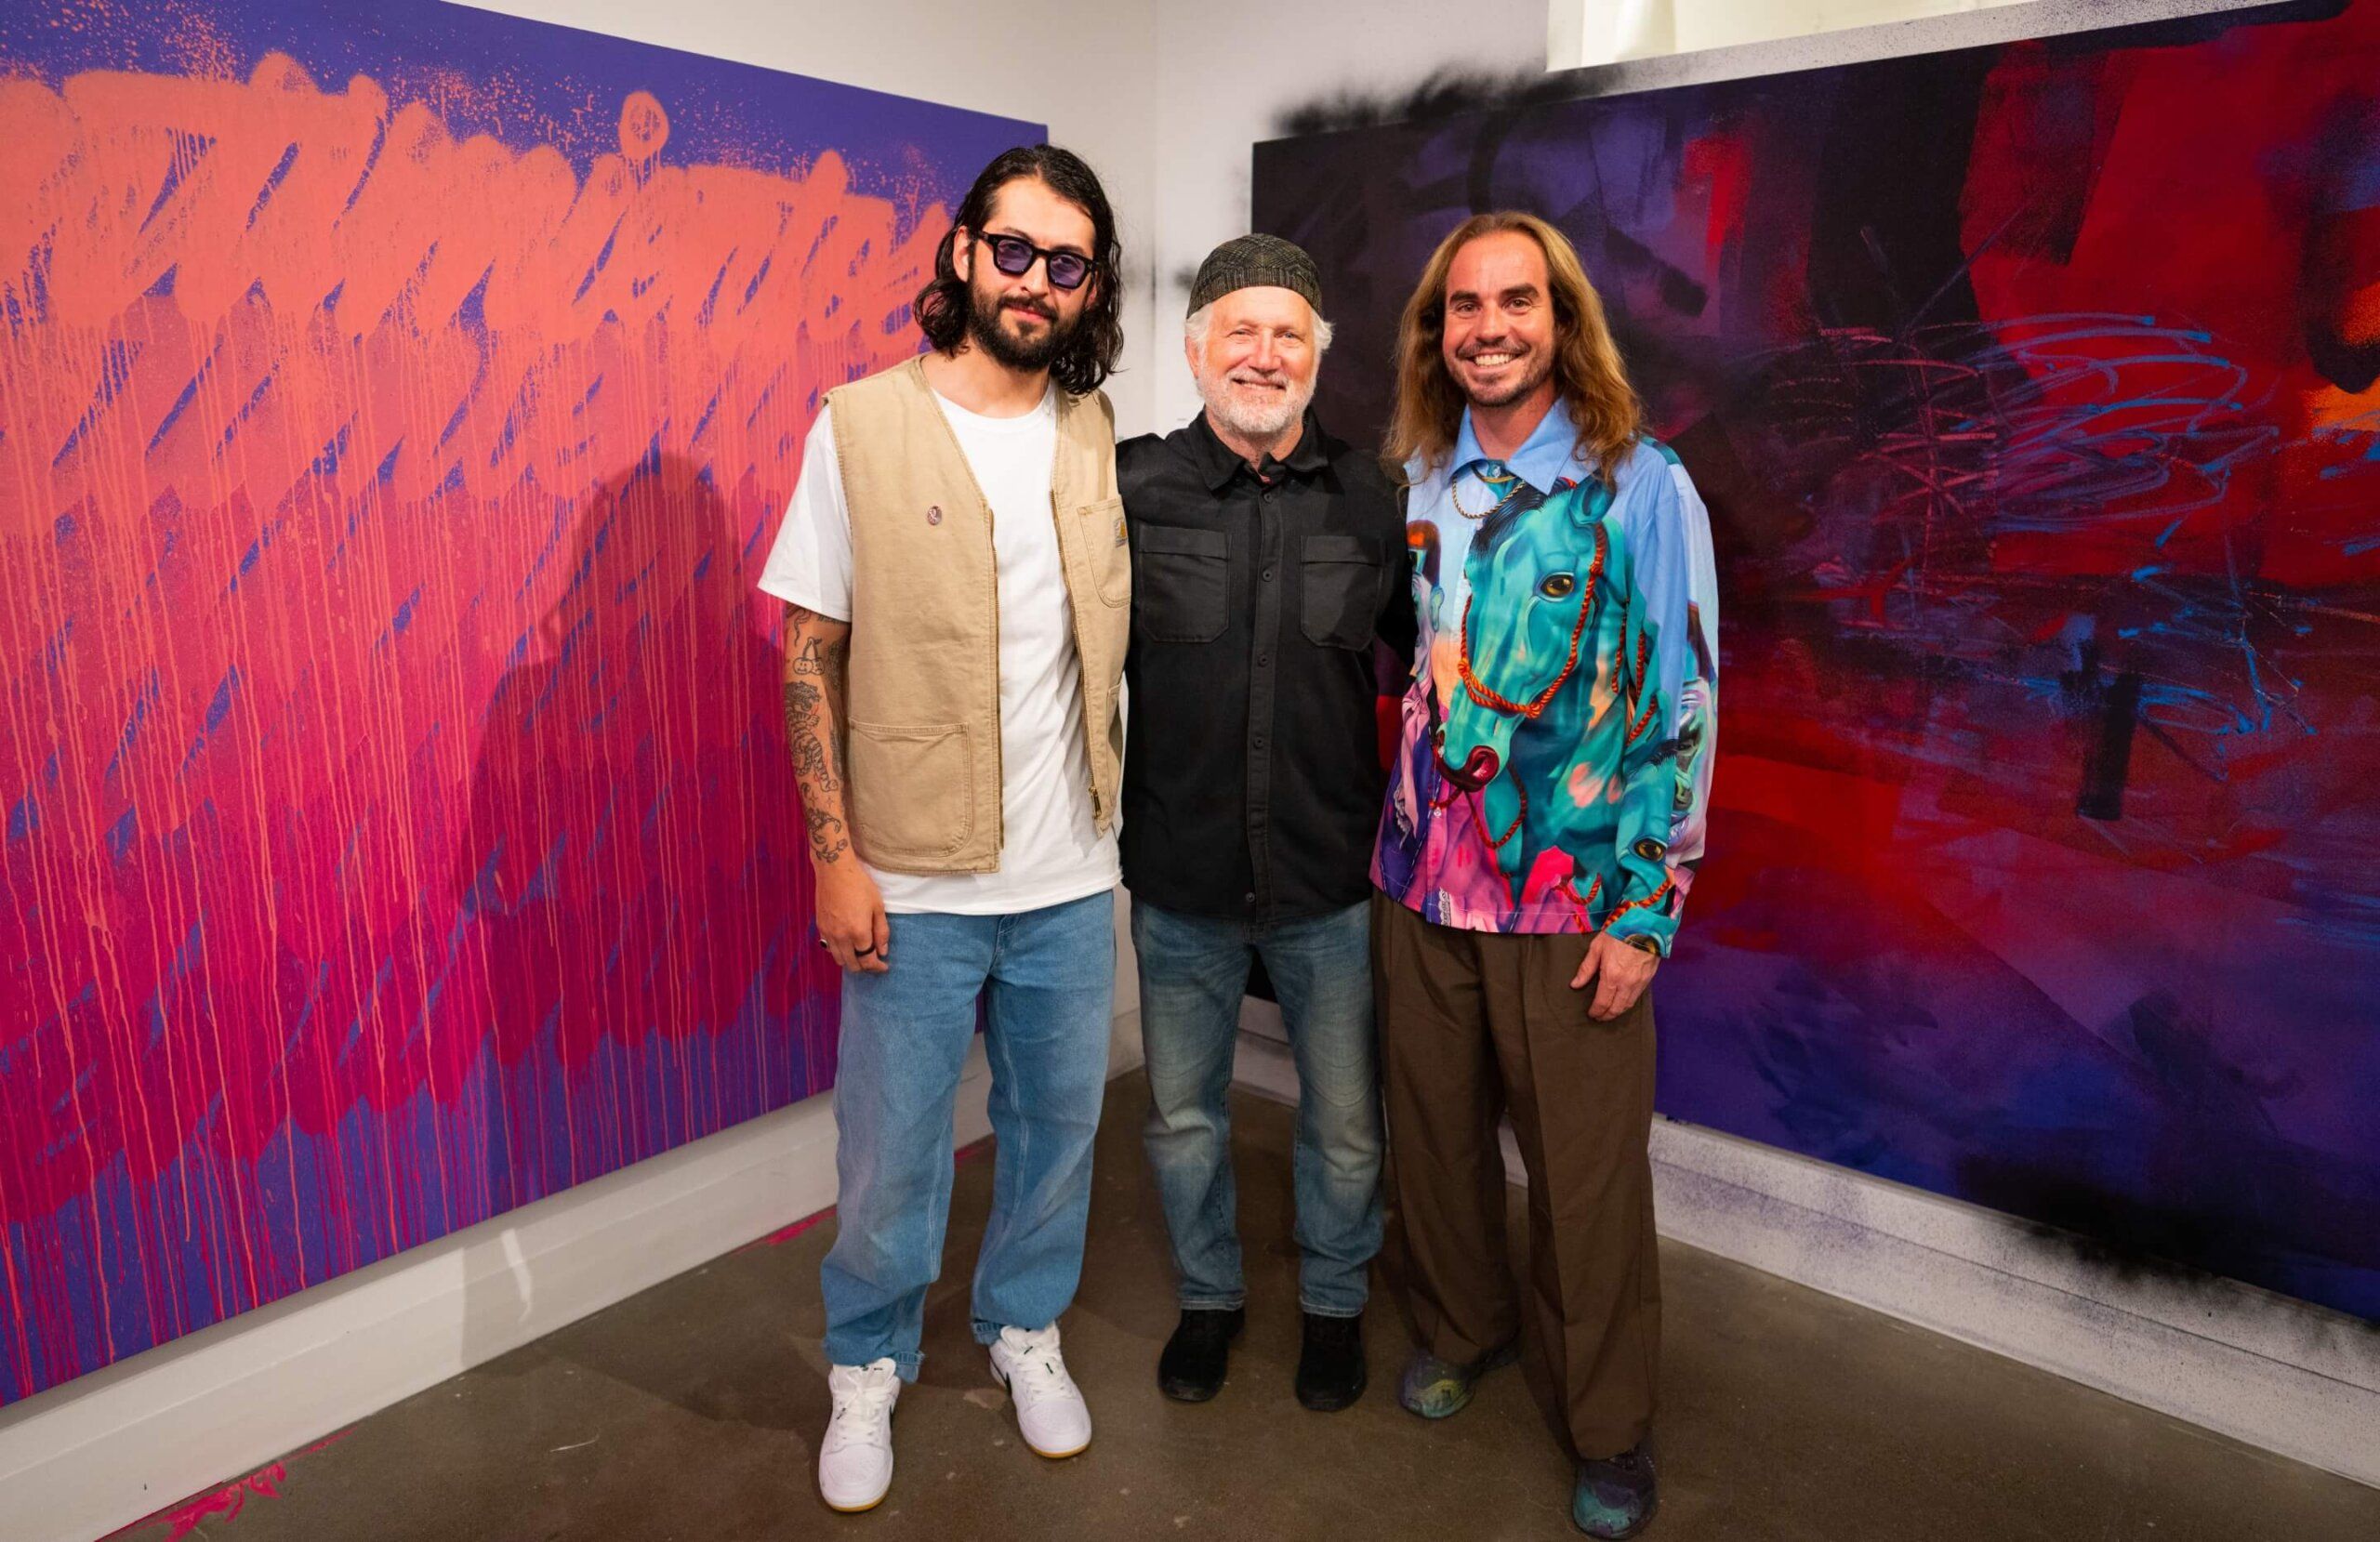 Madsteez and Its a Living pose with Tinker Hatfield in front their paintings